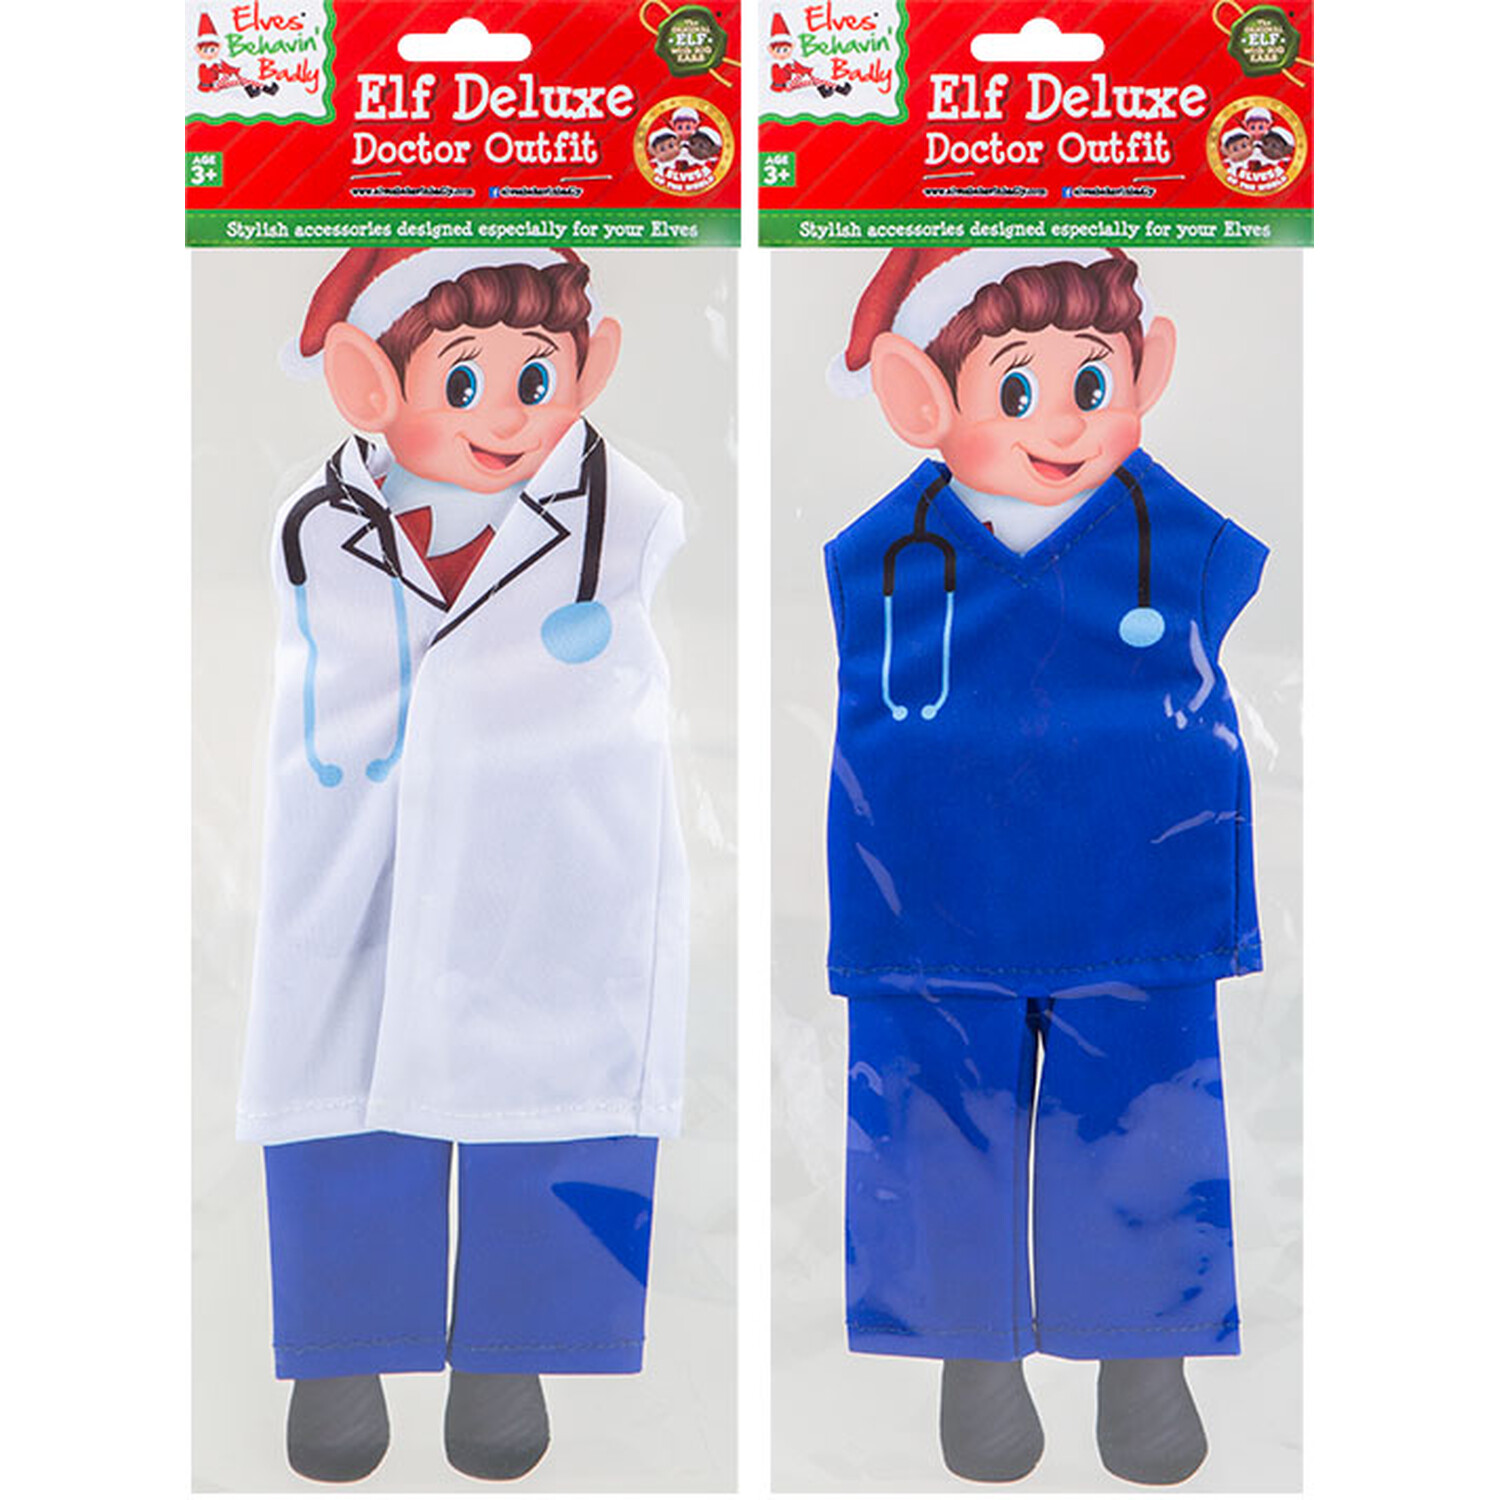 Single Elves Behavin' Badly Elf Doctor Outfit in Assorted styles Image